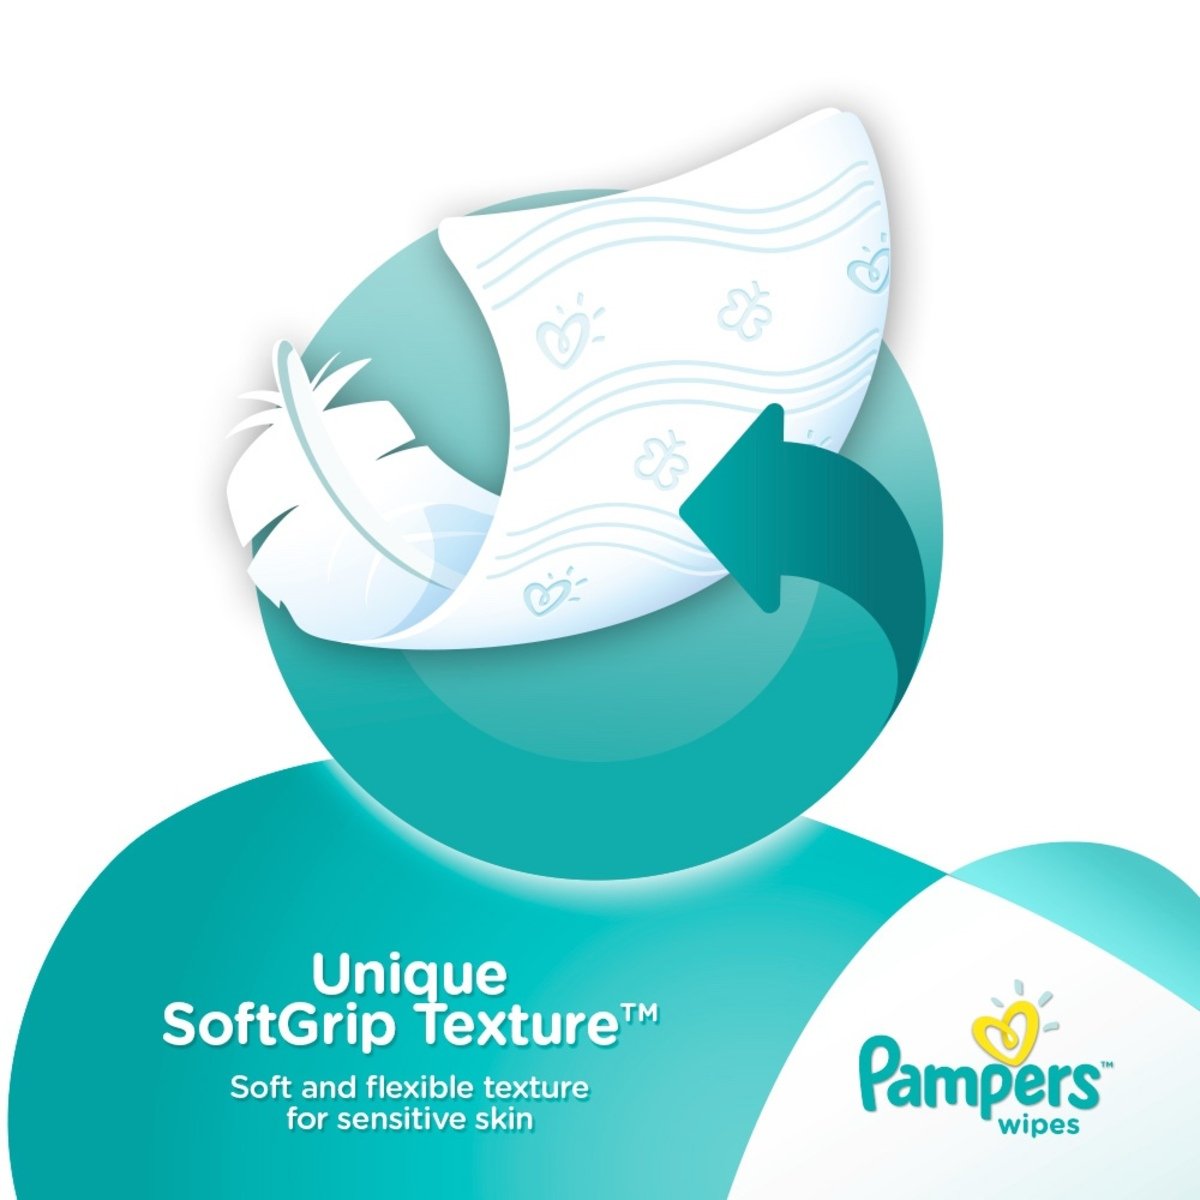 Pampers Baby Wipes Sensitive 12pcs